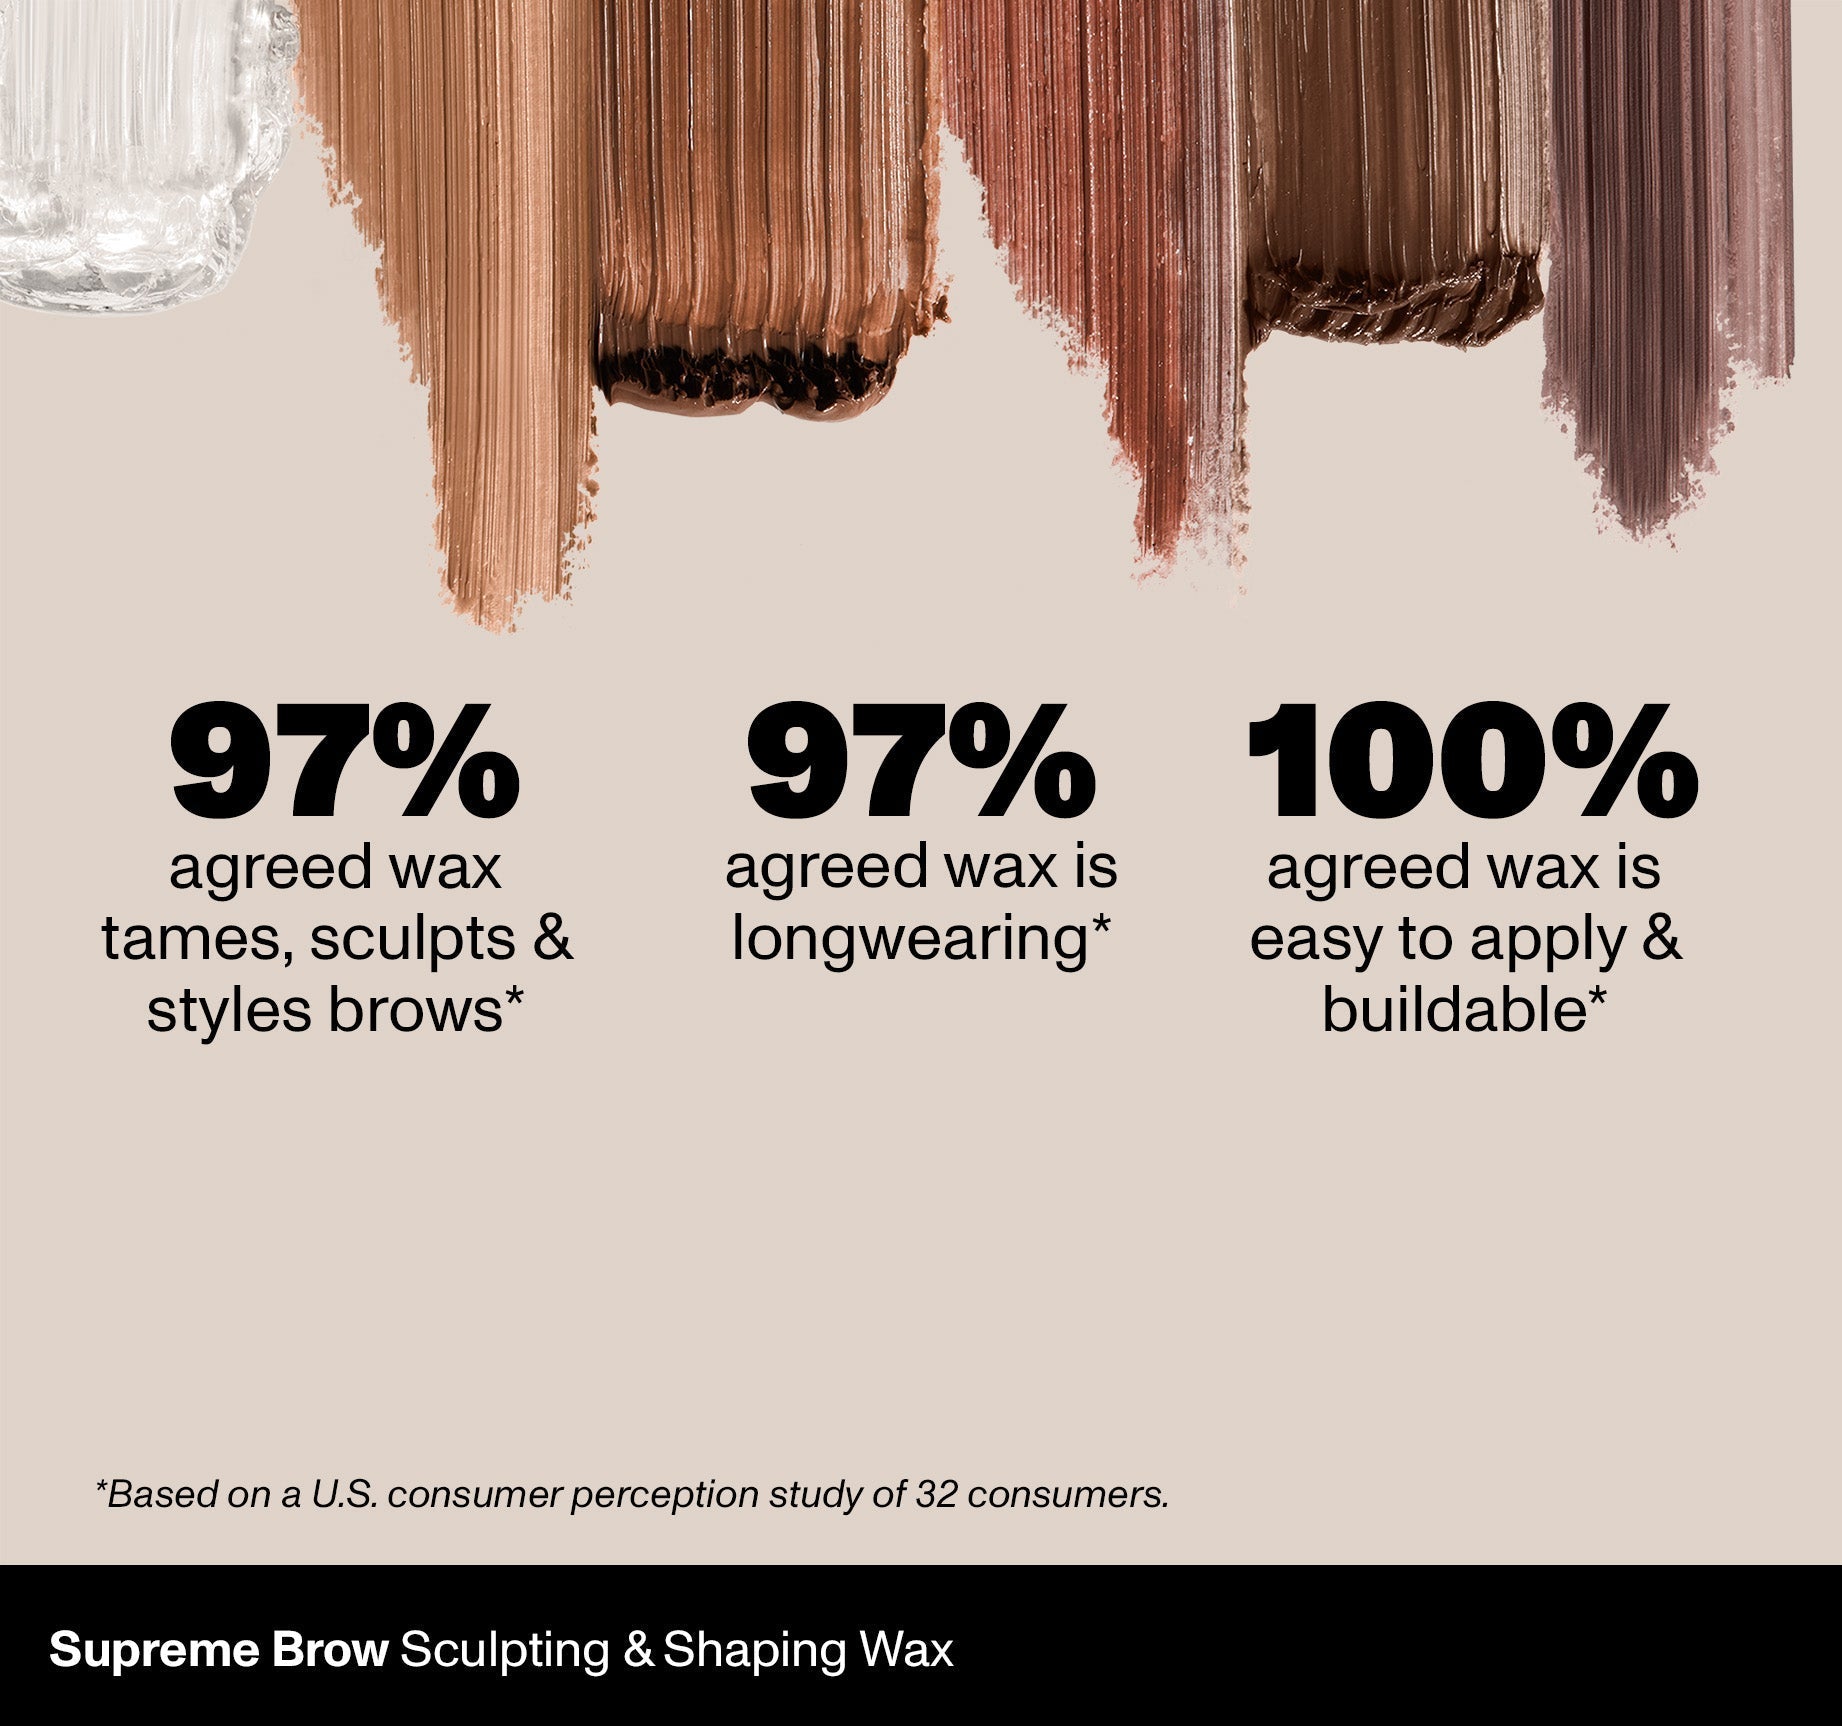 Supreme Brow Sculpting And Shaping Wax - Chocolate Mousse - Image 5